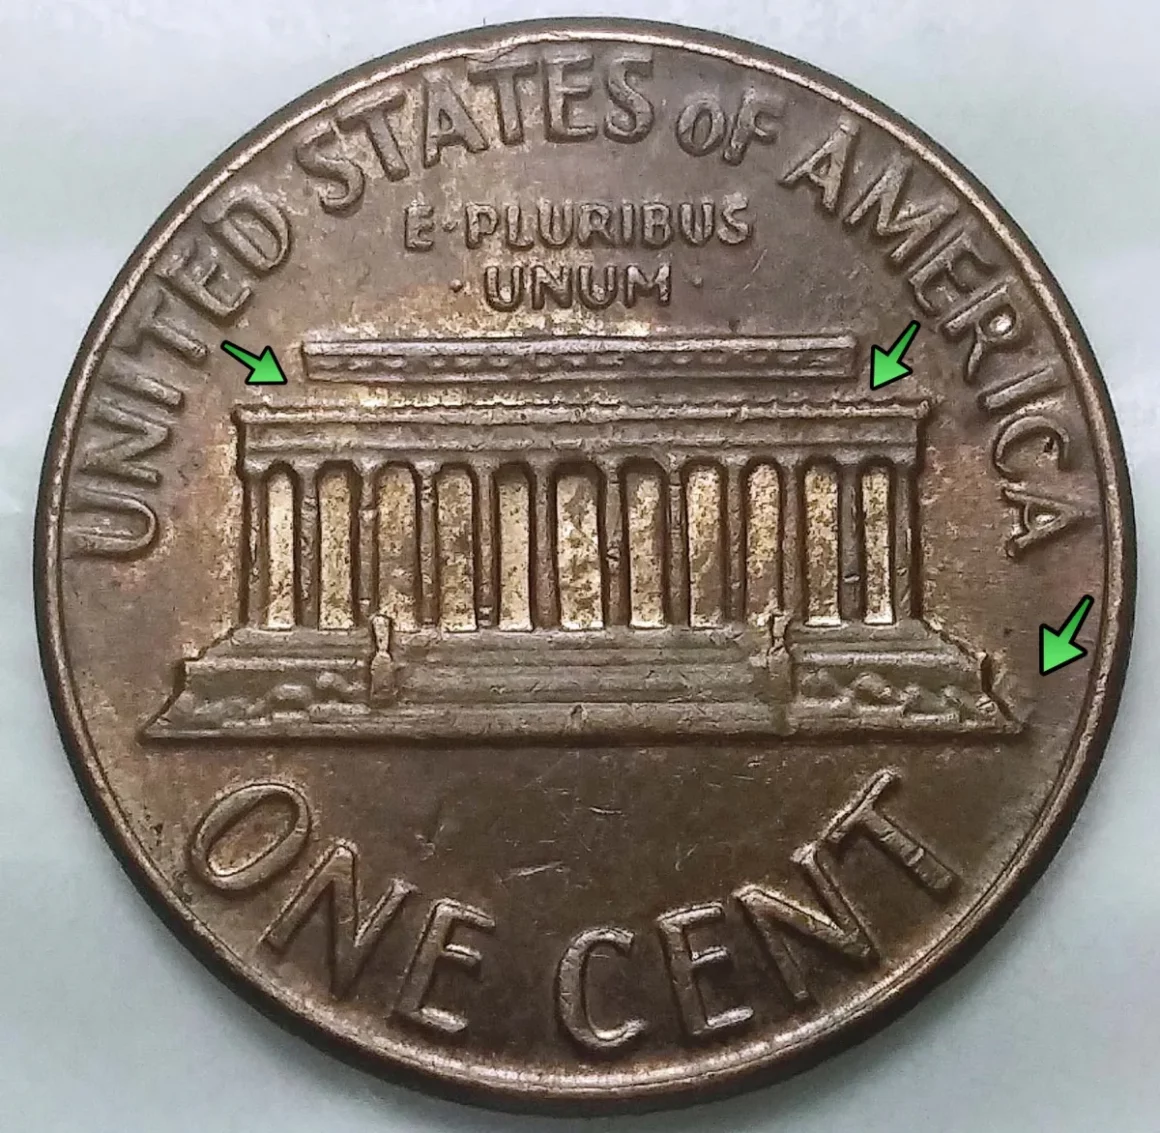 1968-D Penny with Floating Roof